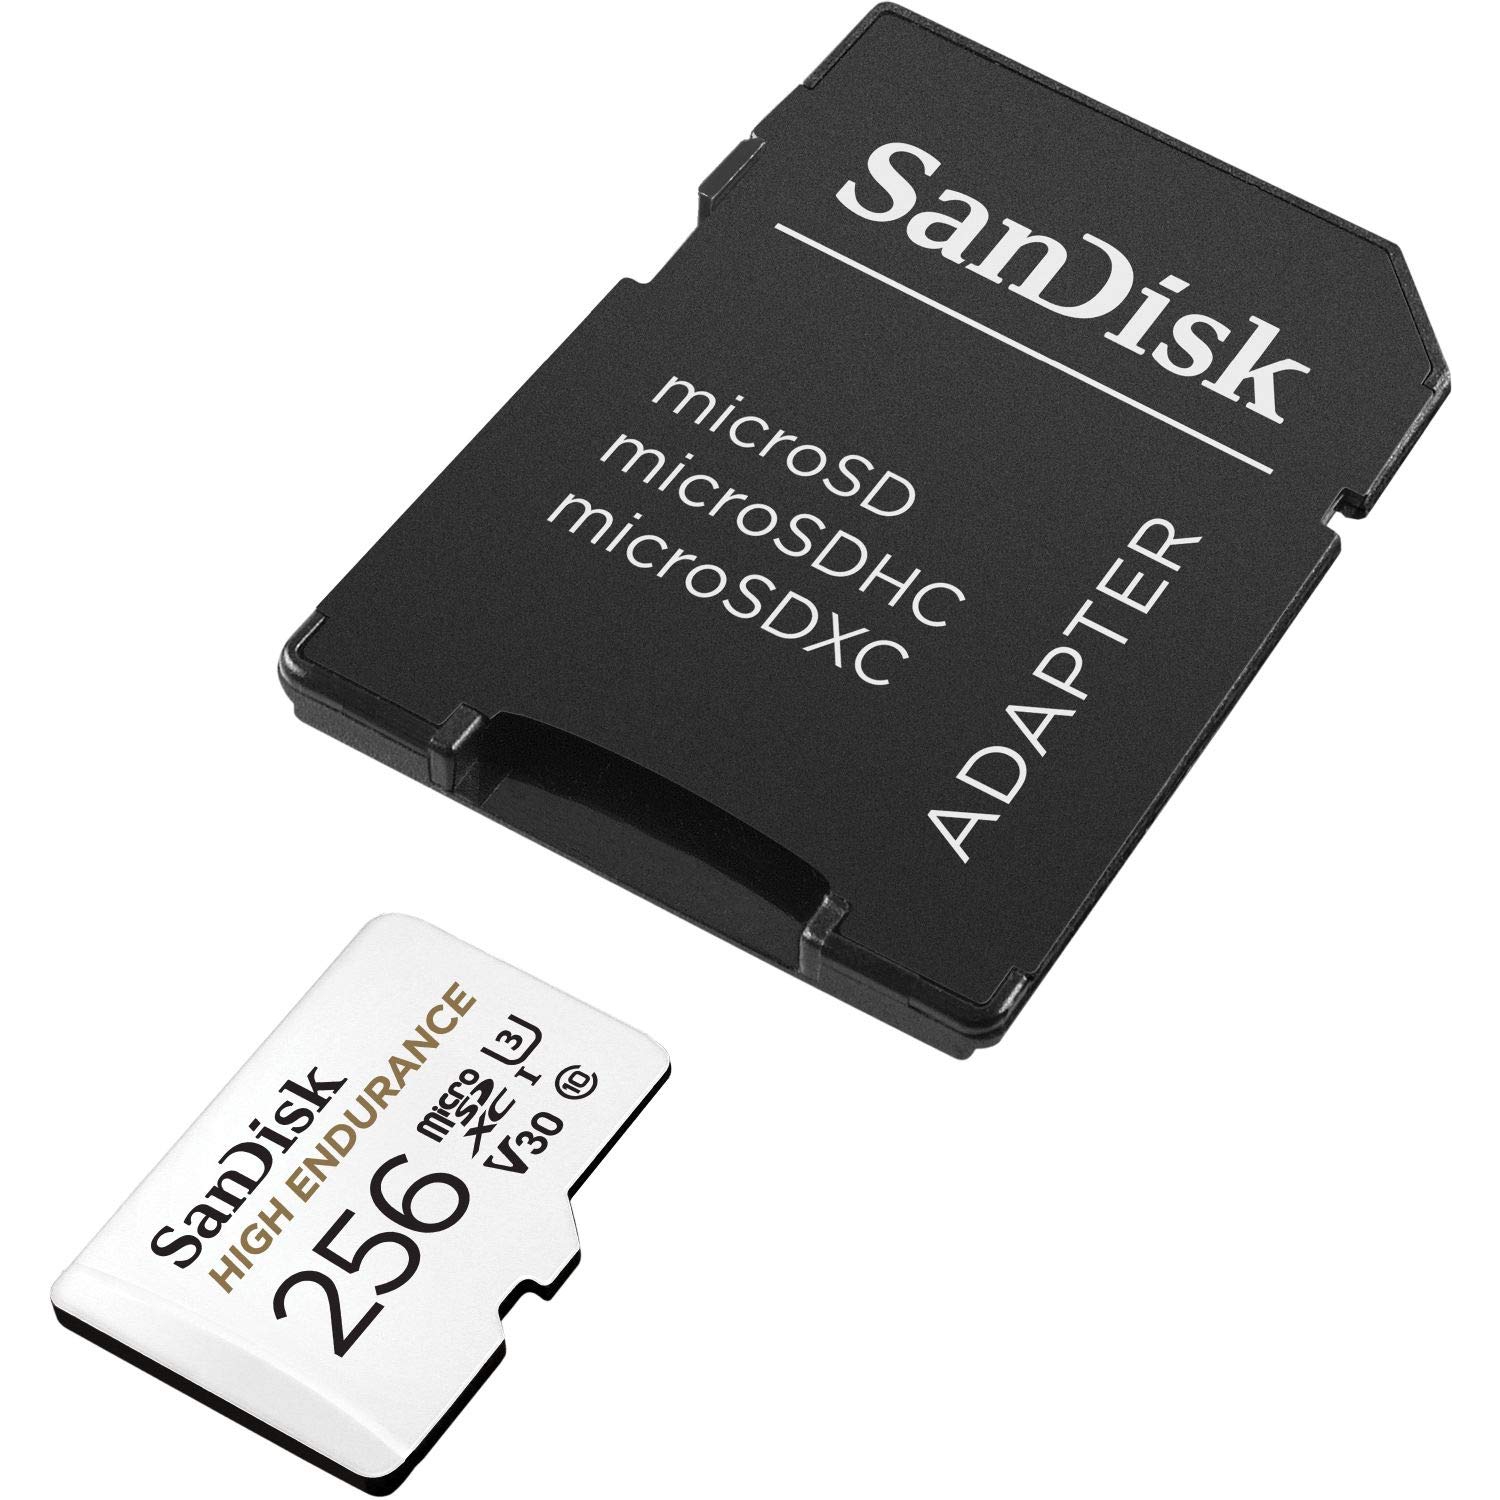 SanDisk 256GB High Endurance Micro SD Card with Adapter SDSQQNR